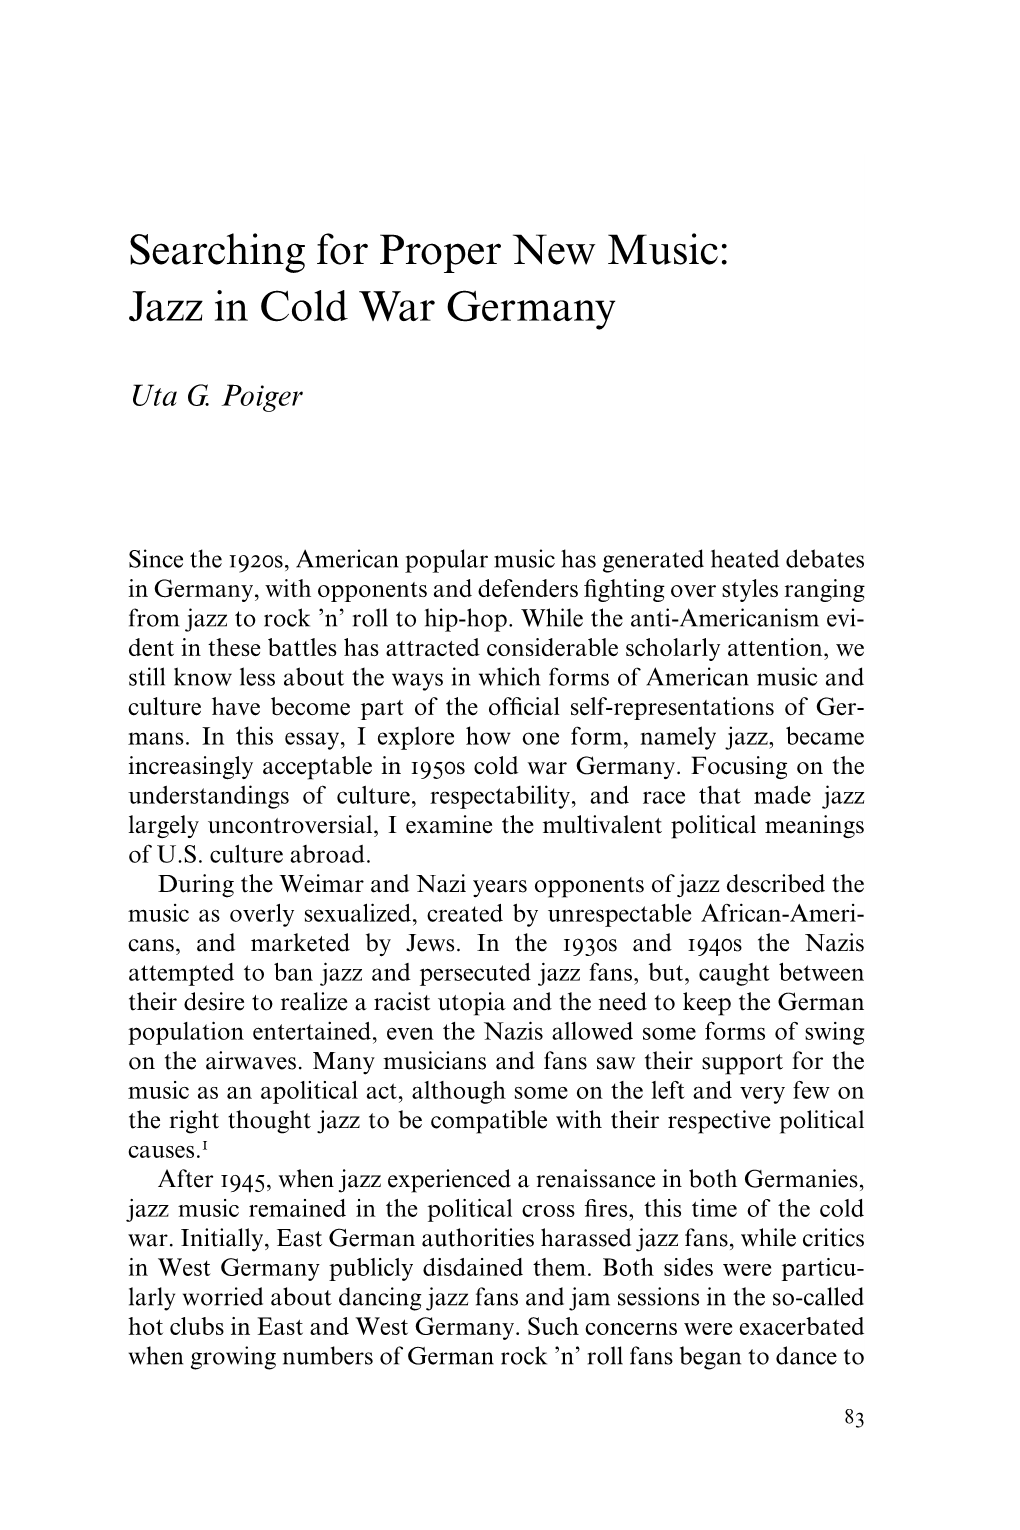 Jazz in Cold War Germany